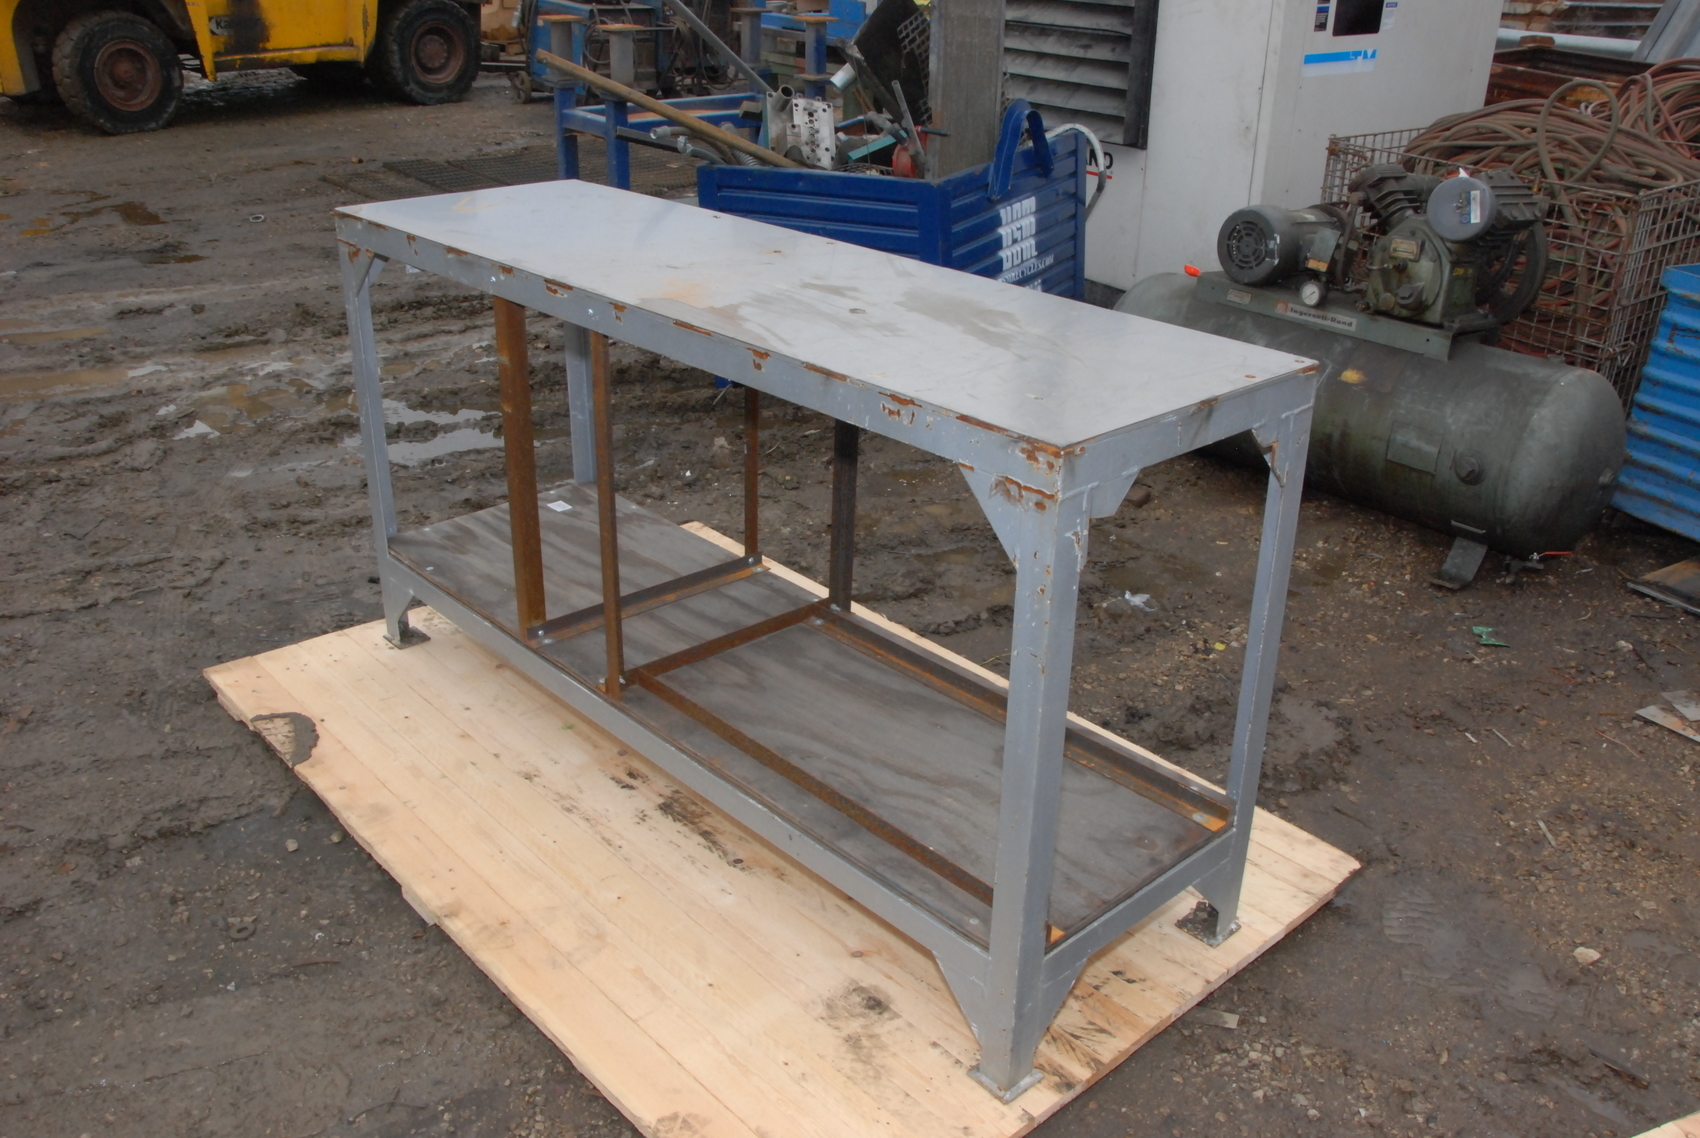 Welding table 70x22,36.5 tall.3/8 thick top plus stainless sheet